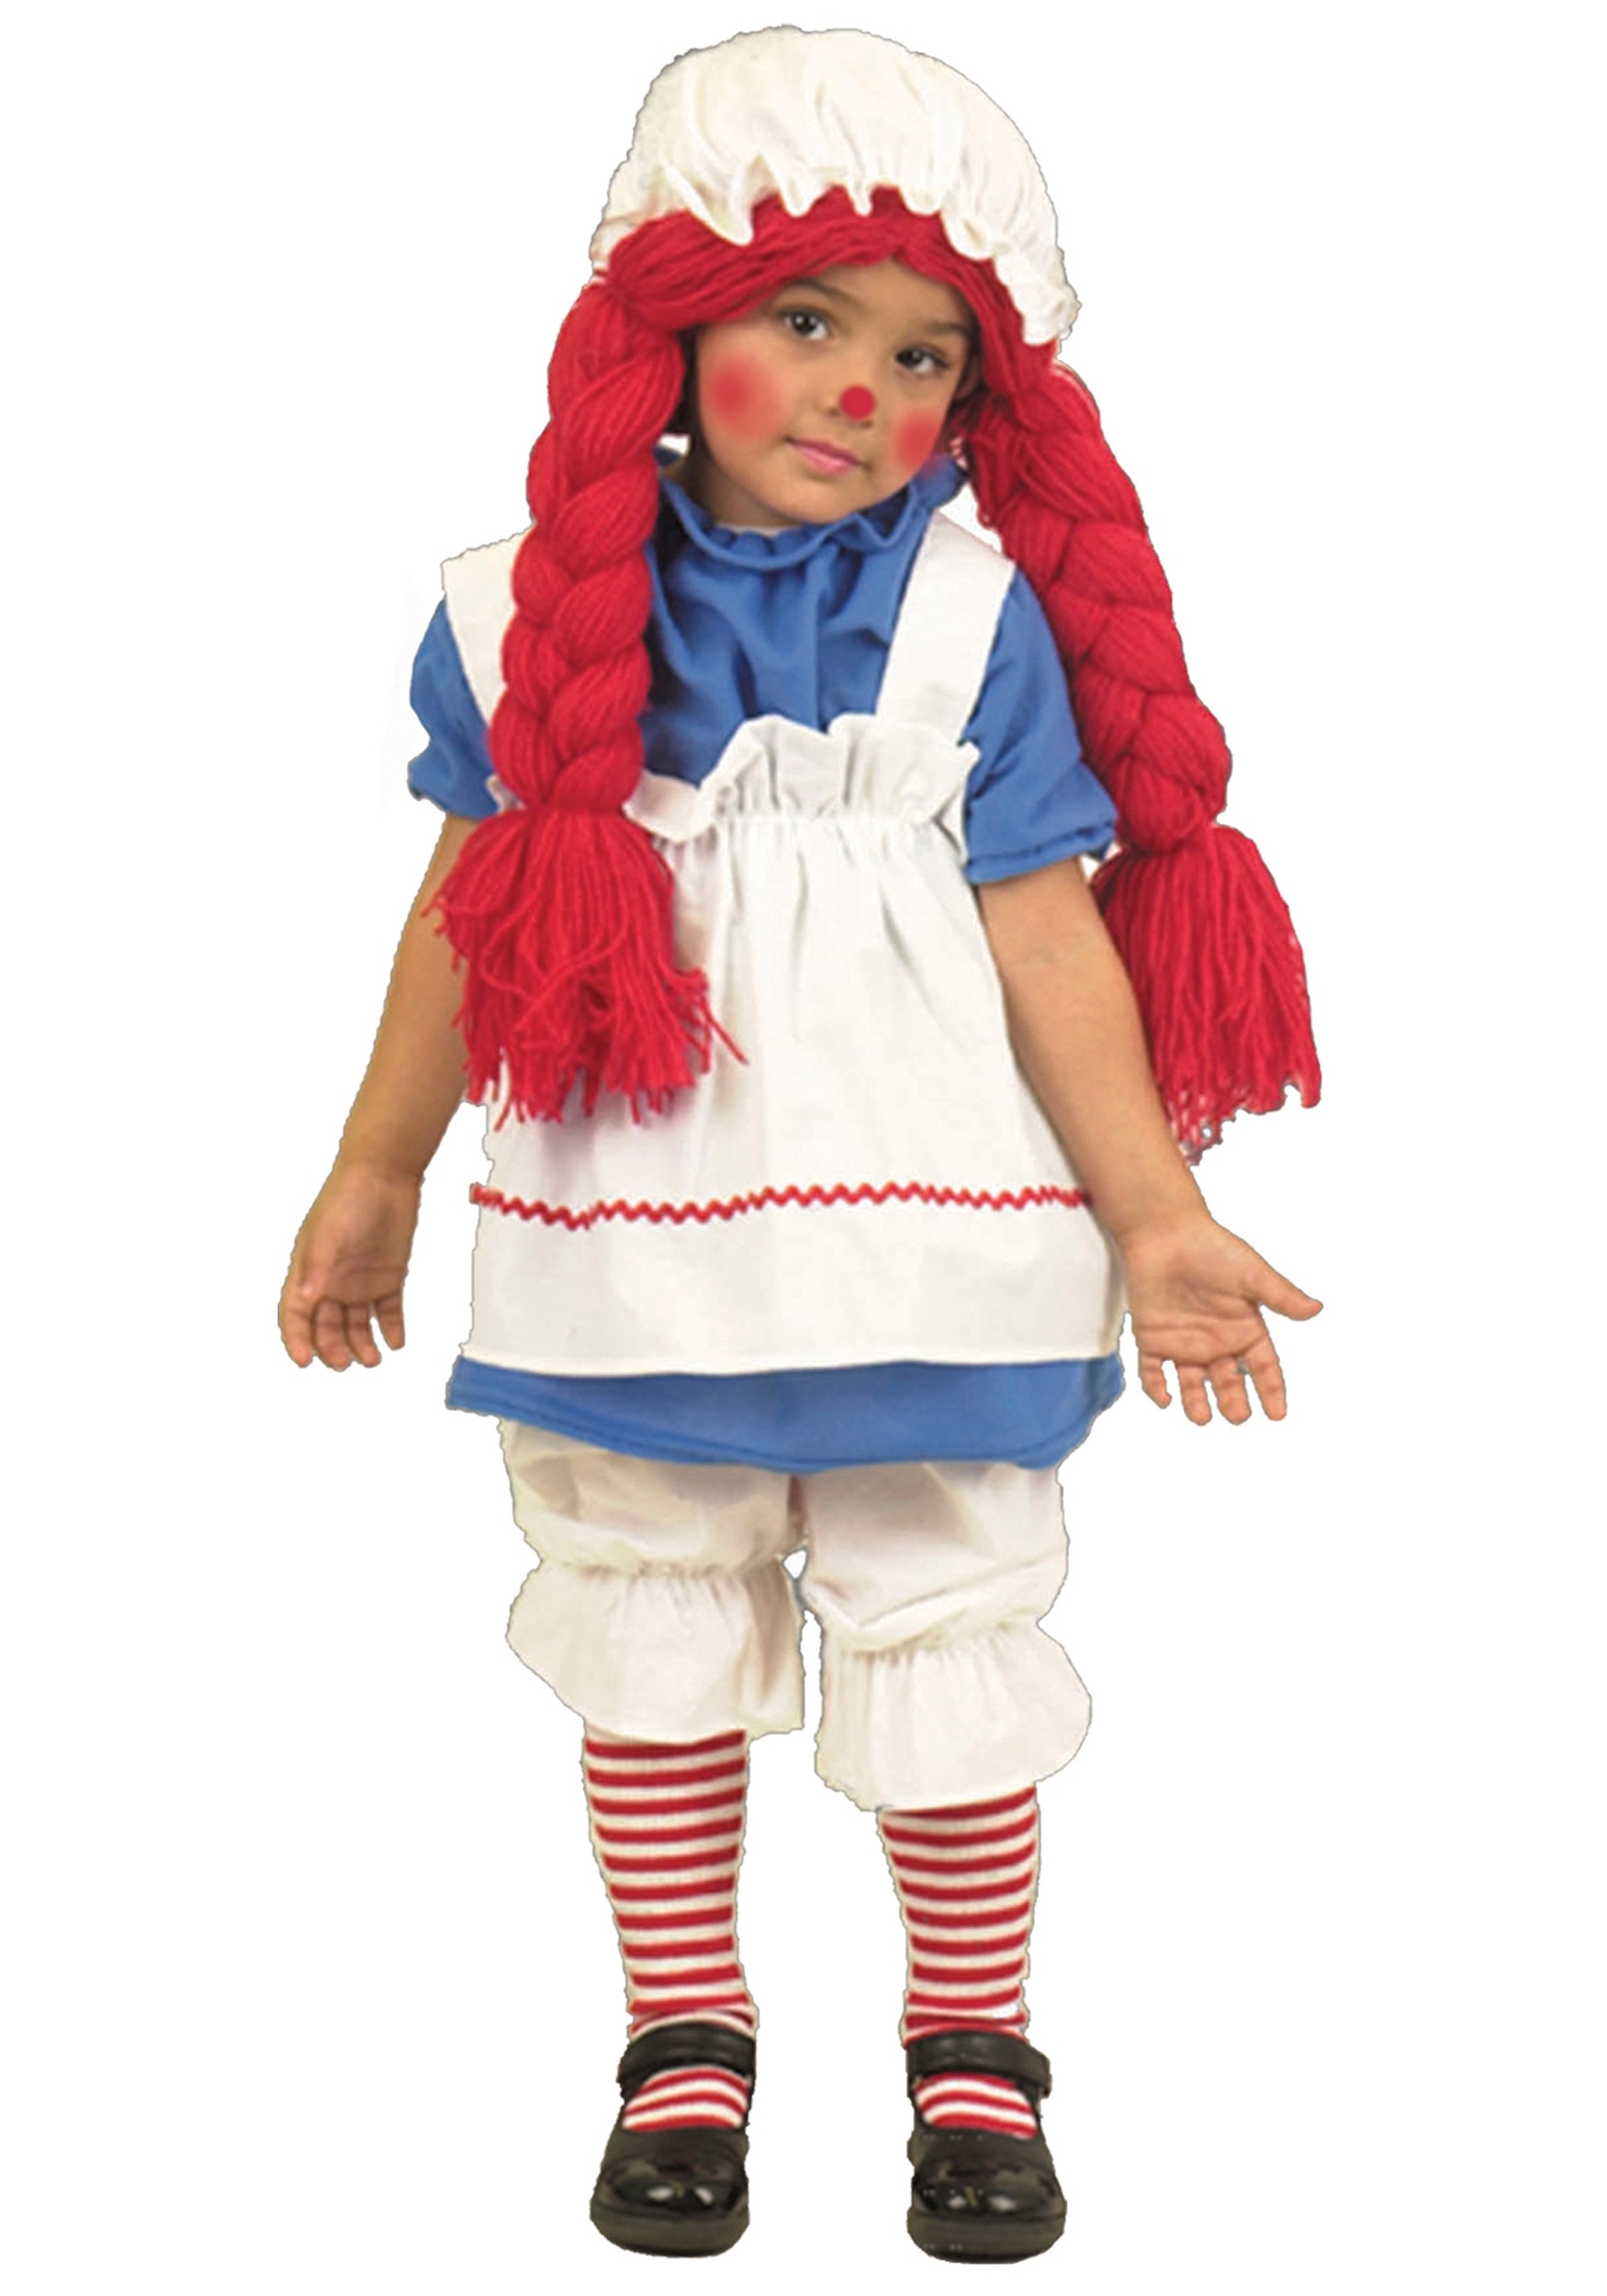 Find many great new & used options and get the best deals for Rag Doll ...